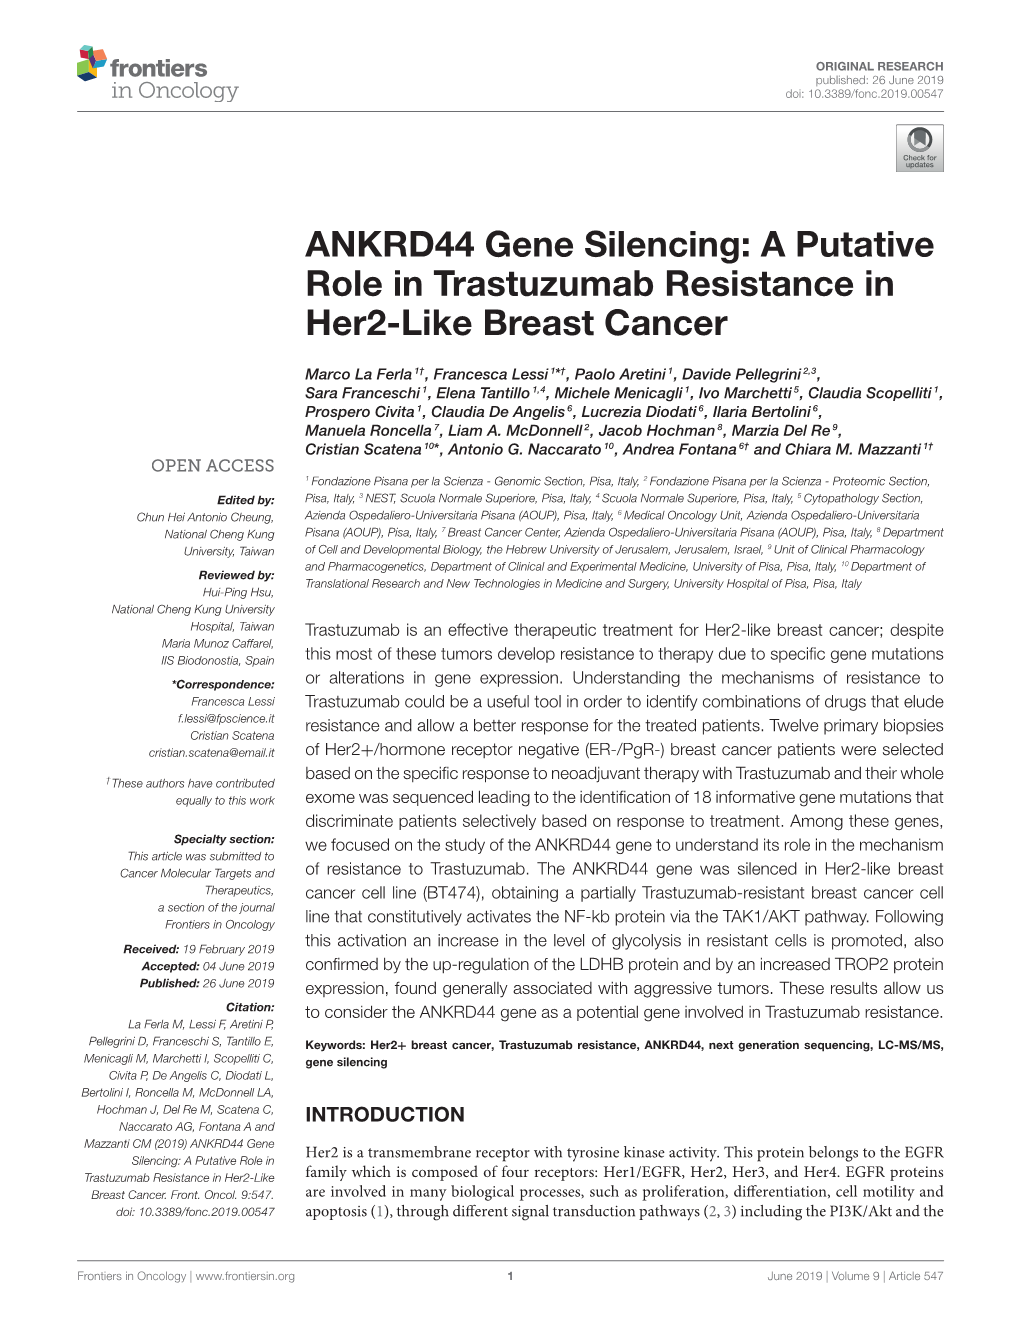 ANKRD44 Gene Silencing: a Putative Role in Trastuzumab Resistance in Her2-Like Breast Cancer